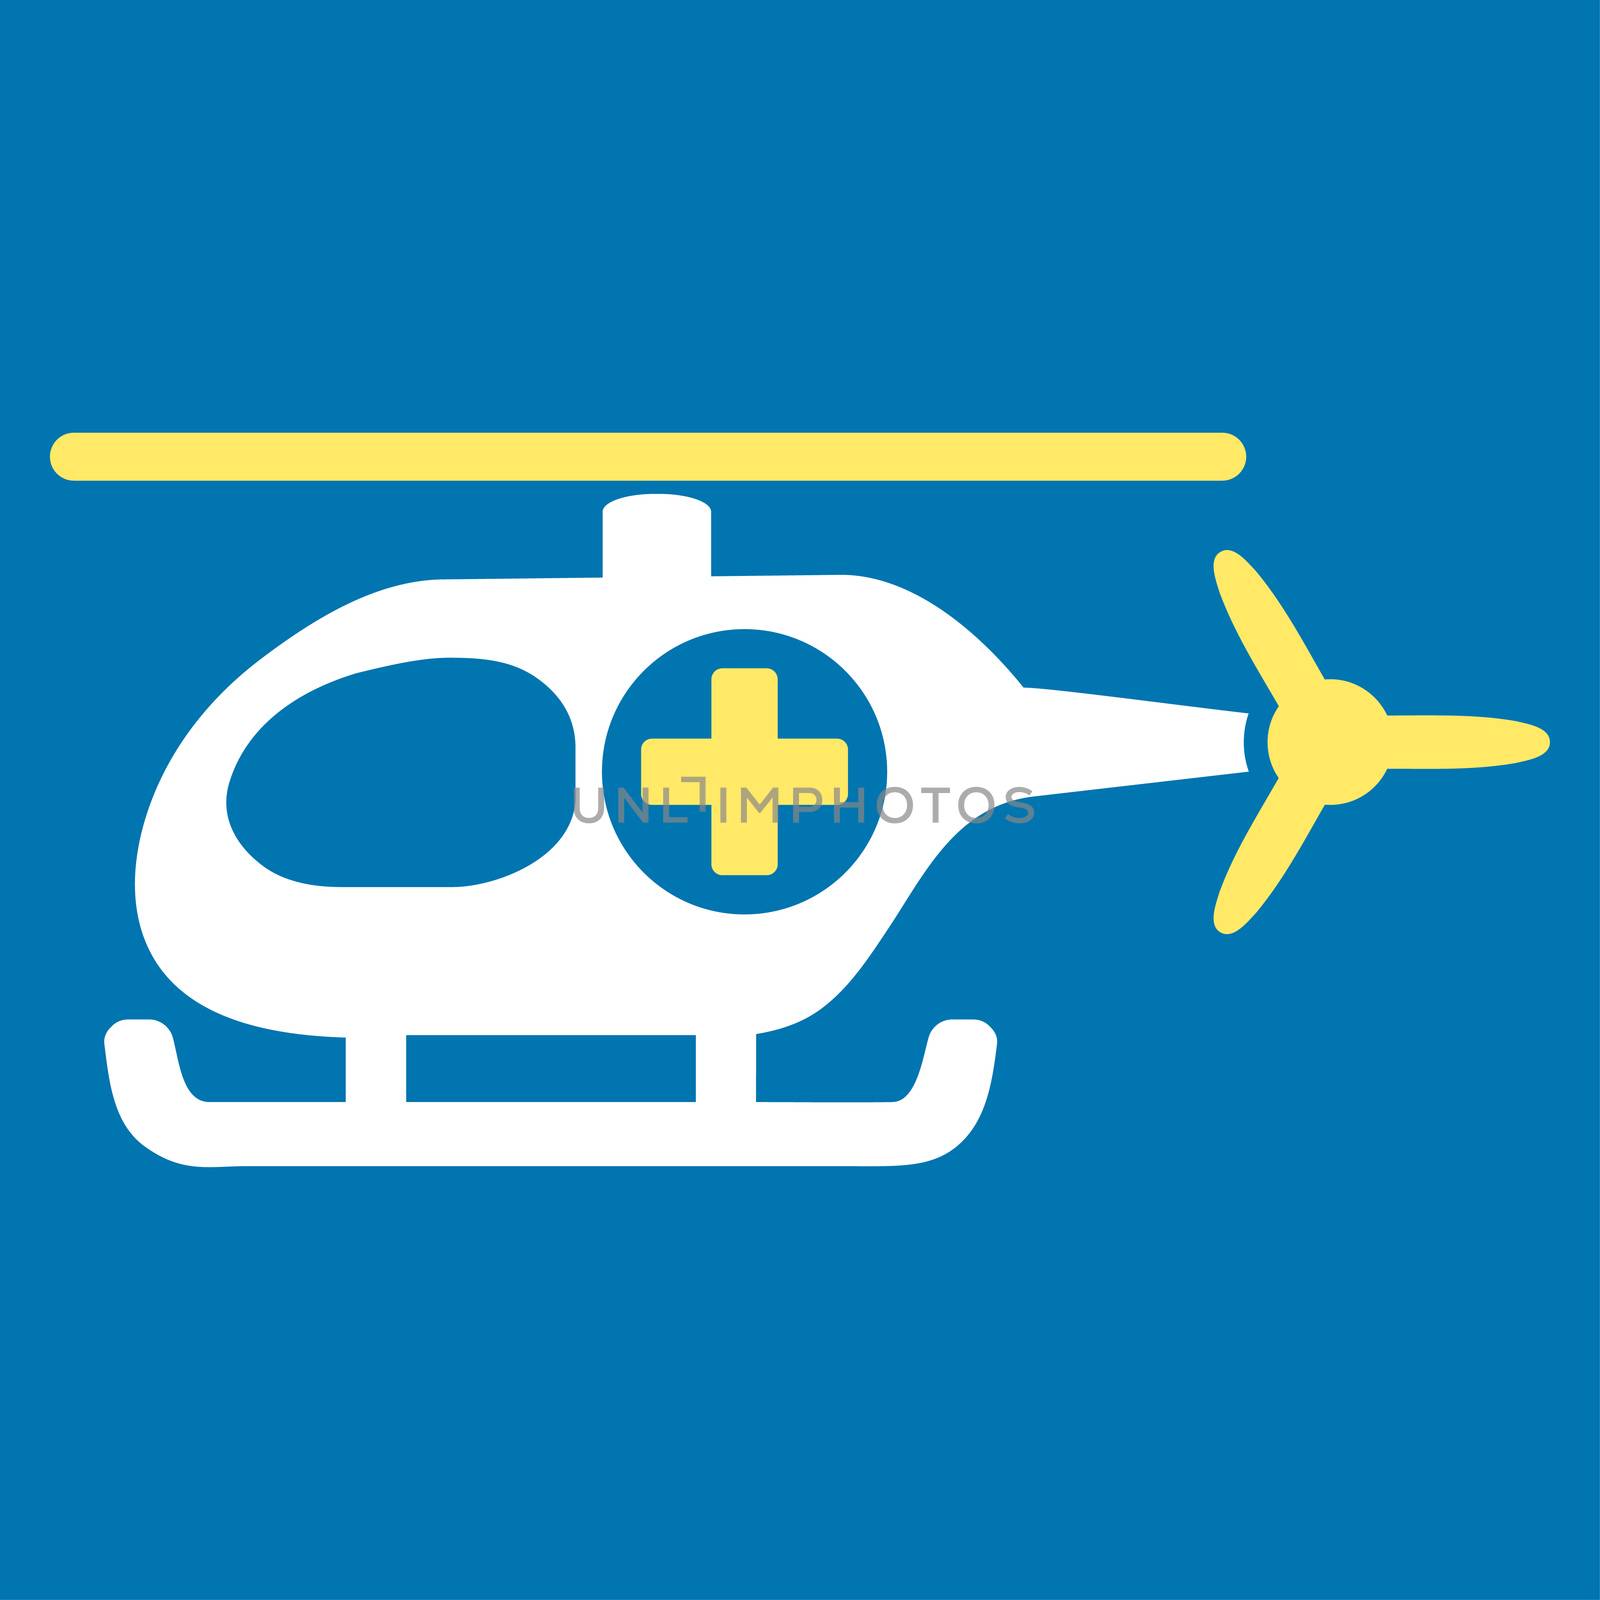 Medical Helicopter raster icon. Style is bicolor flat symbol, yellow and white colors, rounded angles, blue background.